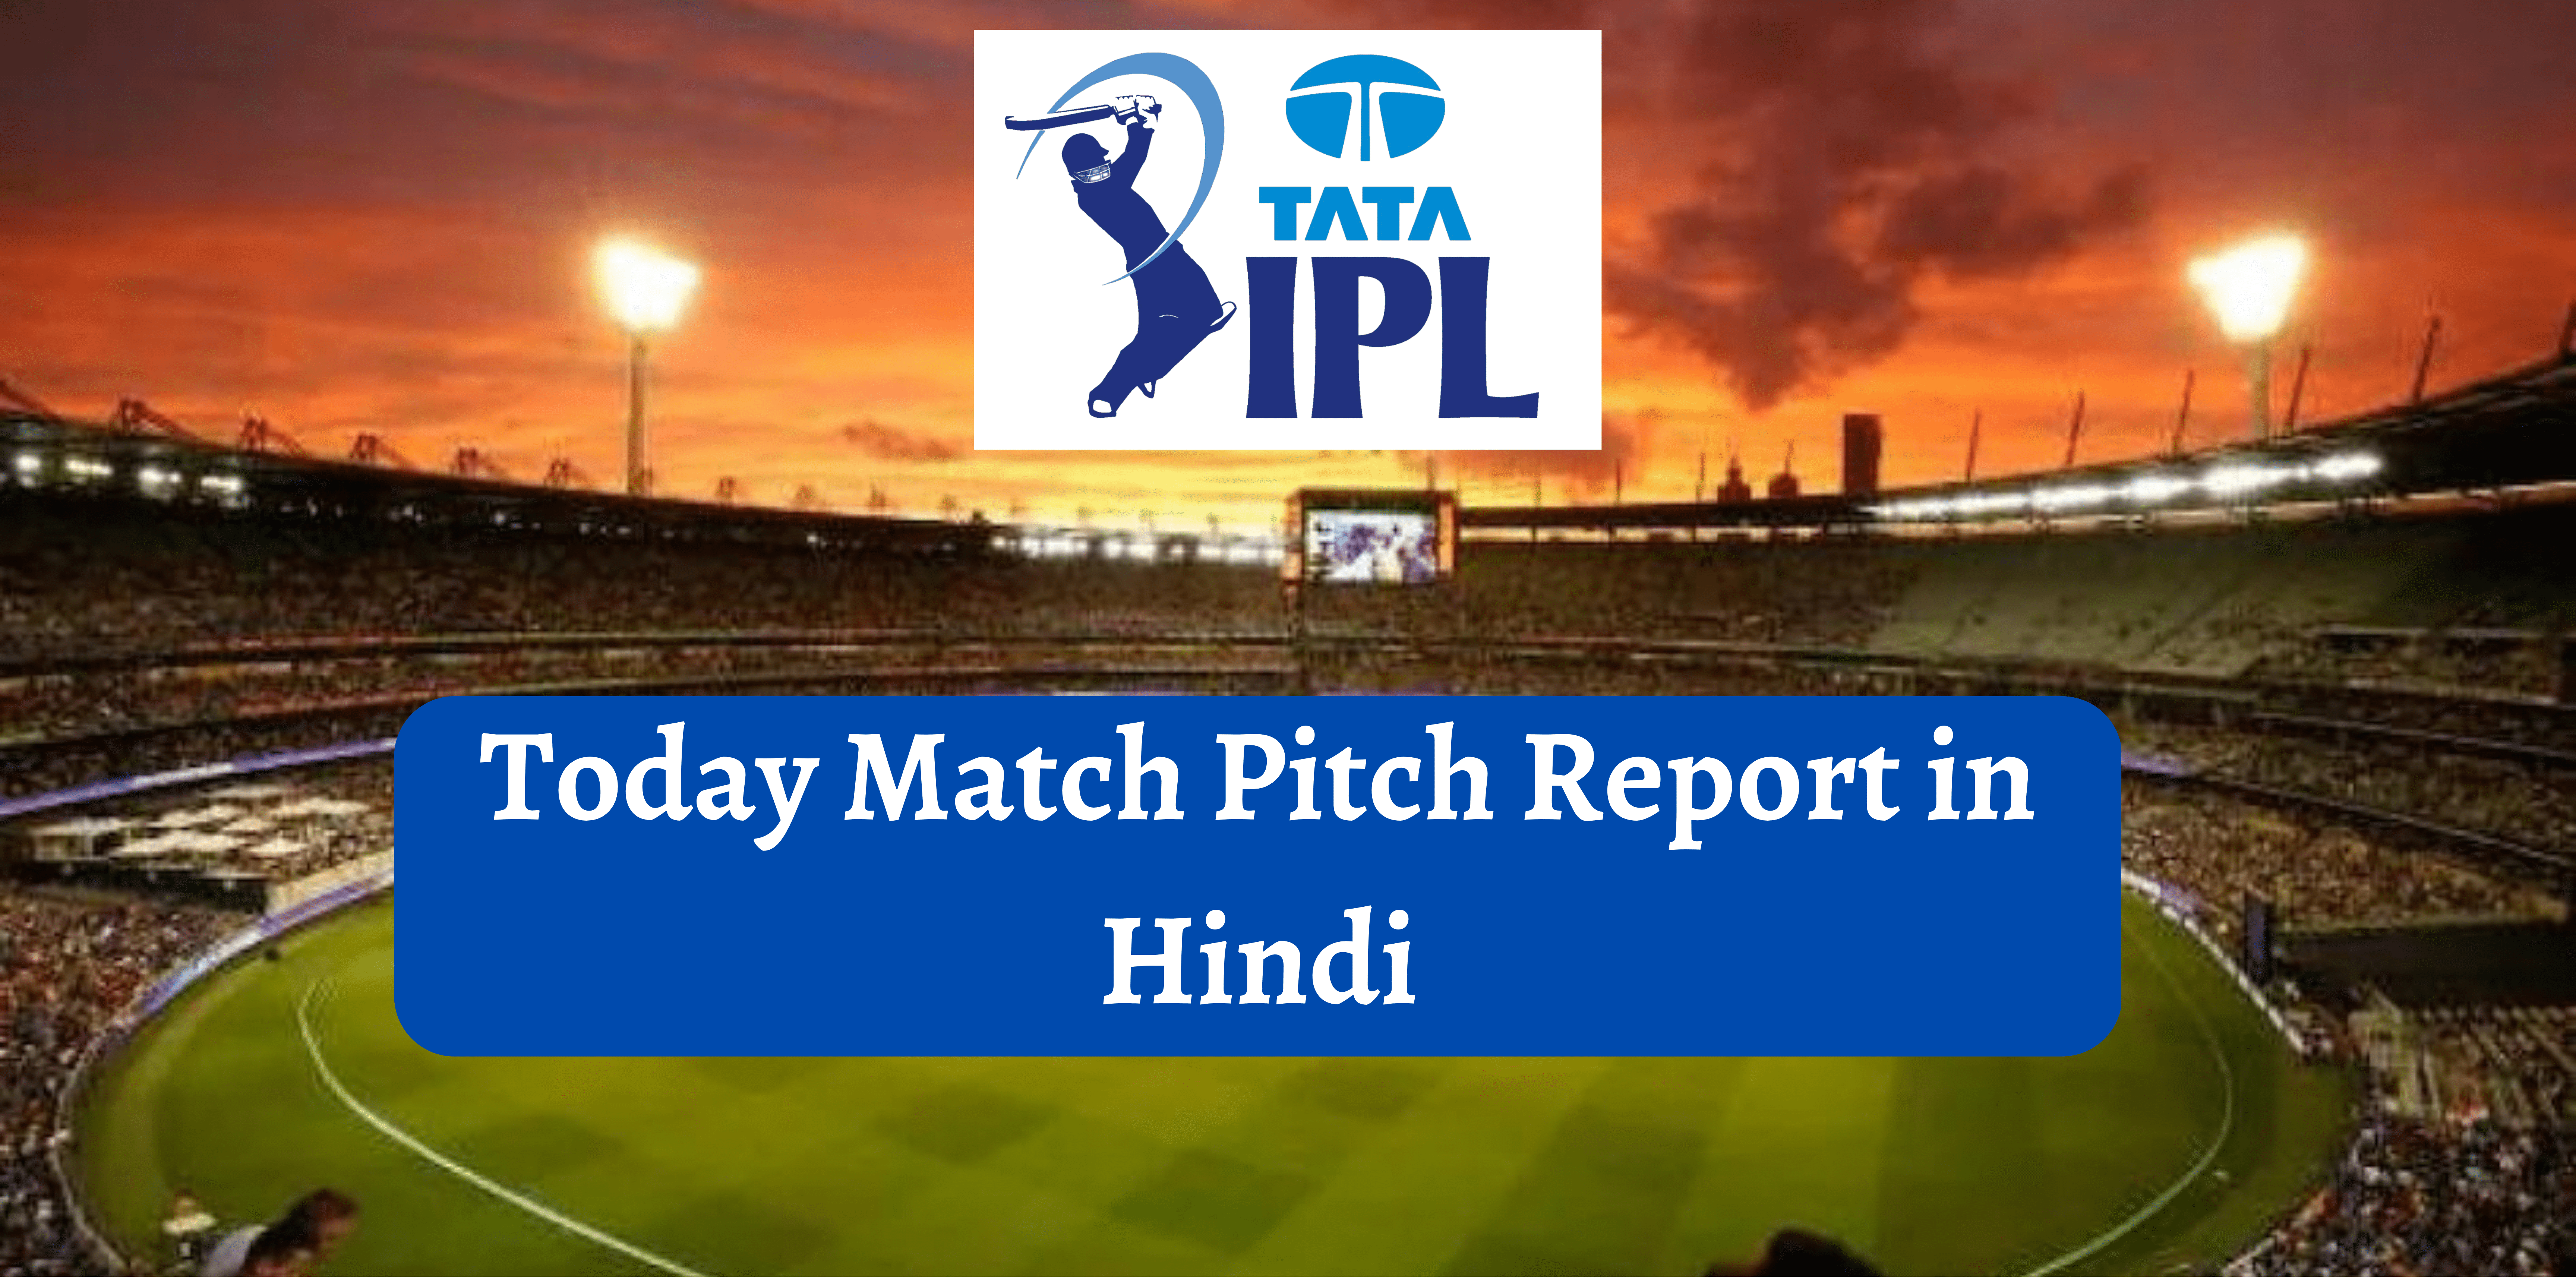 Today Match Pitch Report in Hindi